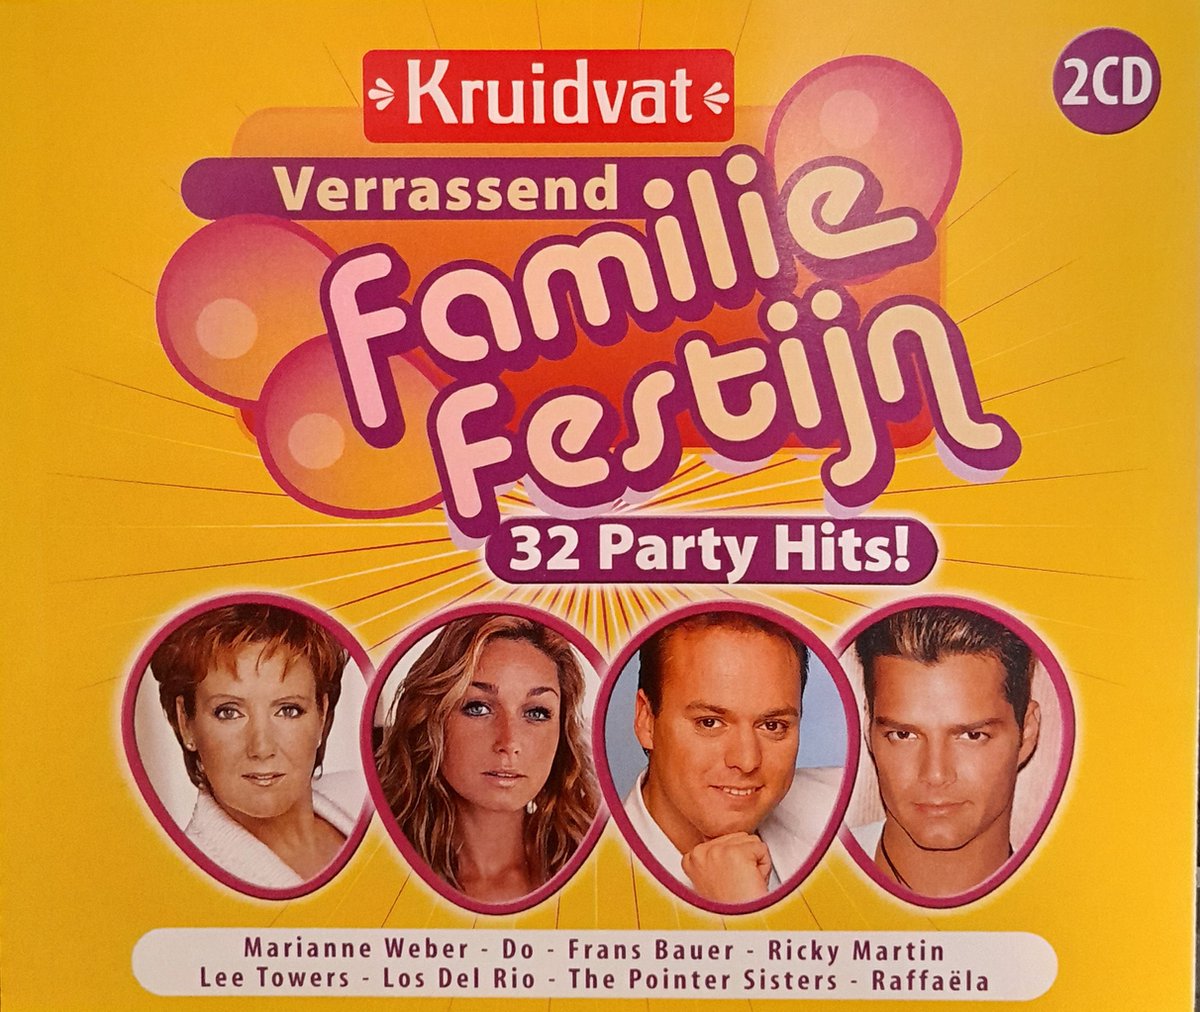 Verrassend Familiefestijn - 32 Partyhits - Dubbel Cd - Frans Bauer, Labelle, O Zone, Dolly Parton, Sailor, The Sunclub, Vader Abraham, Middle Of The Road - Onbekend